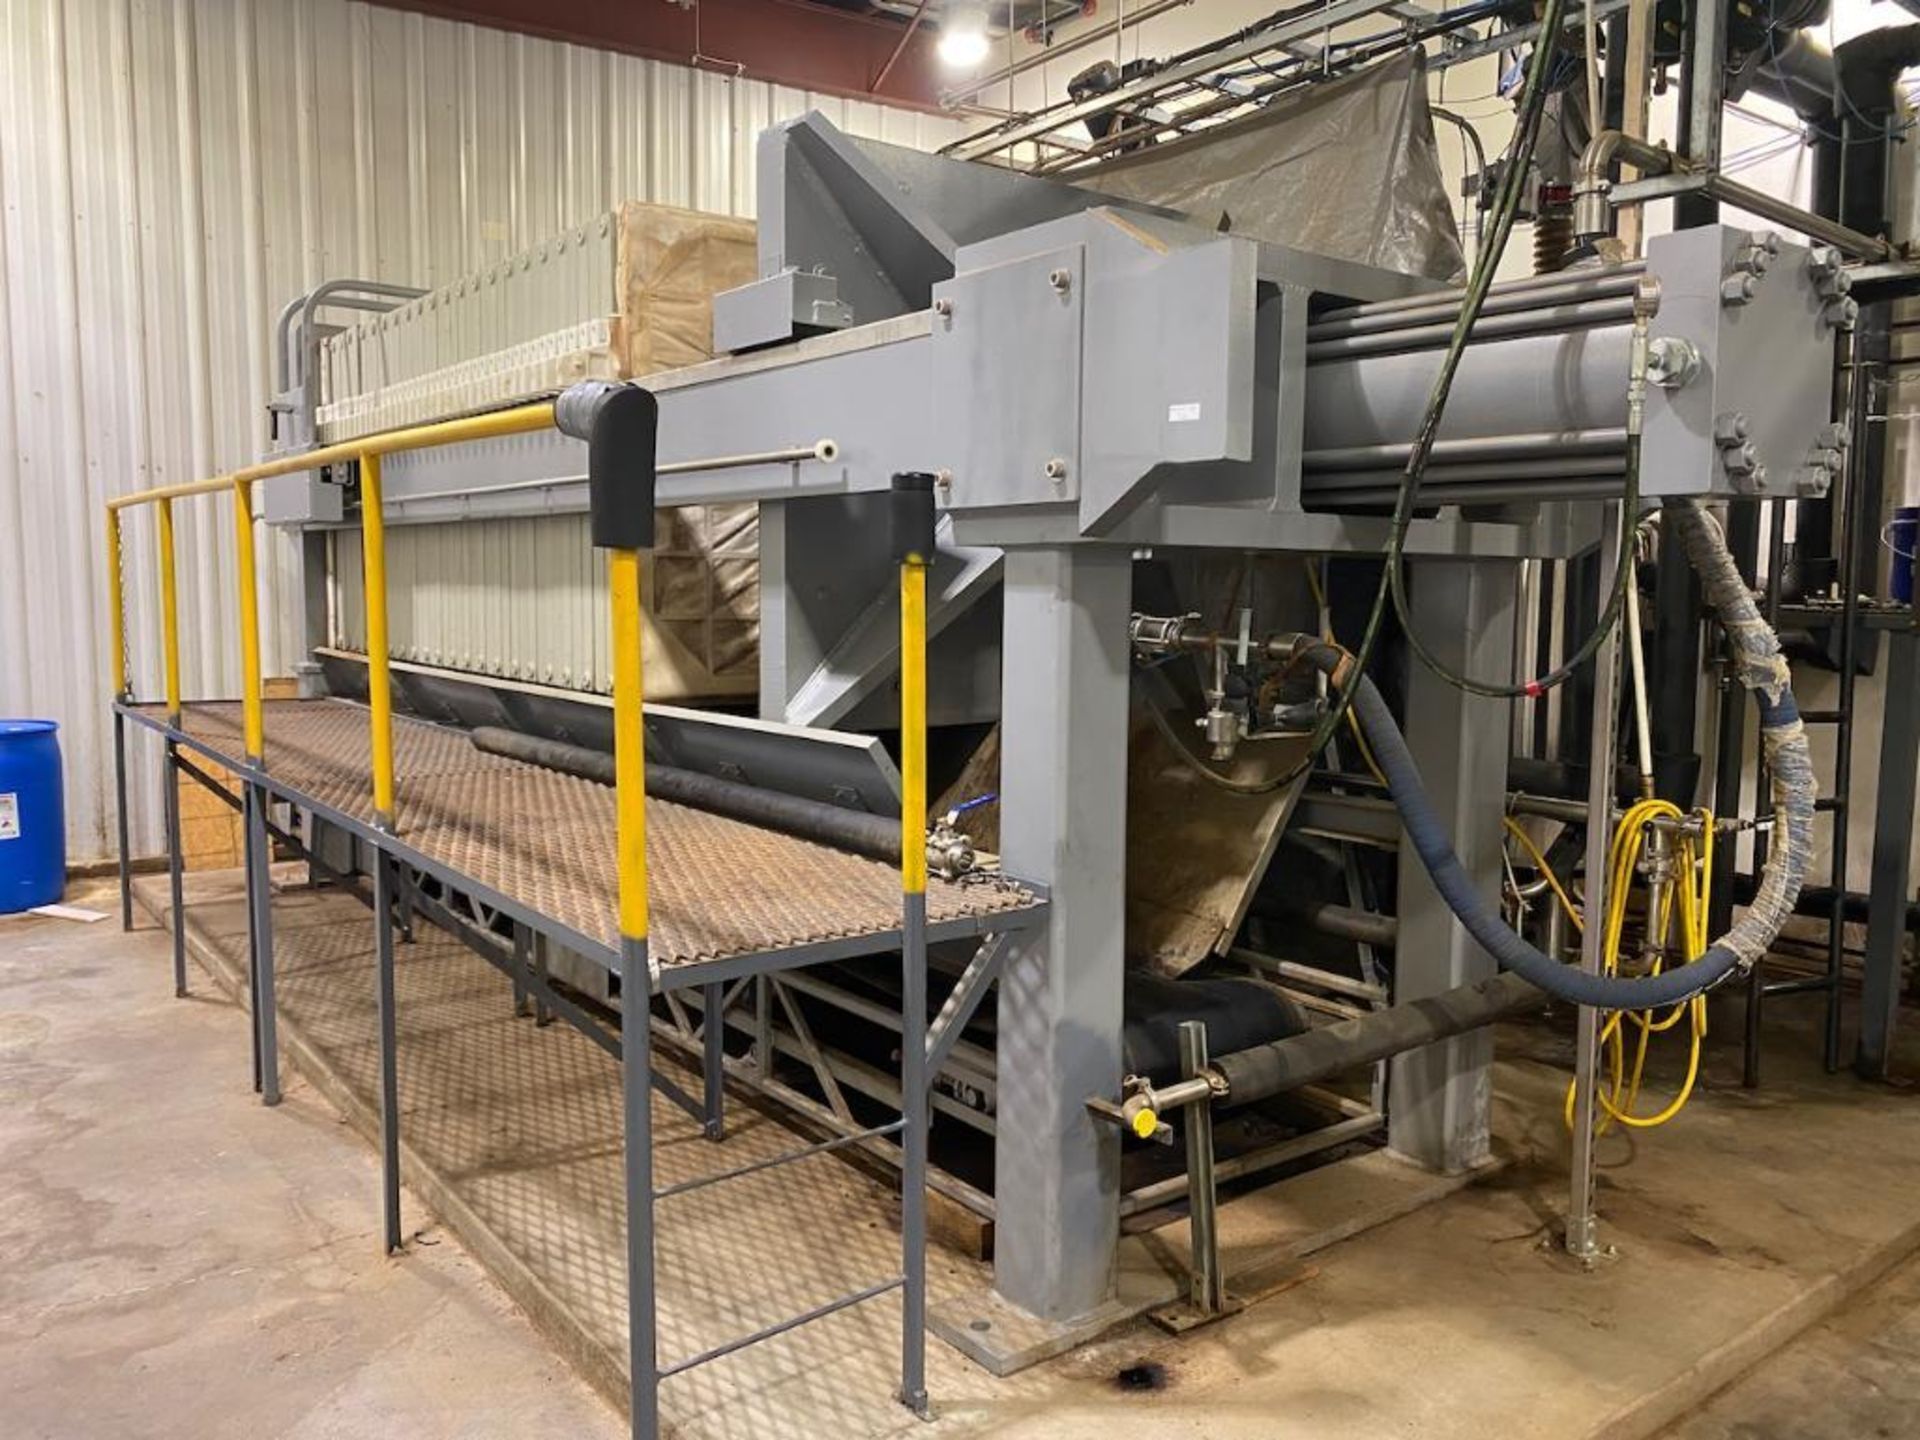 2019 AE 100 Cubic Foot 1500mm Automatic Filter Press - Image 2 of 14